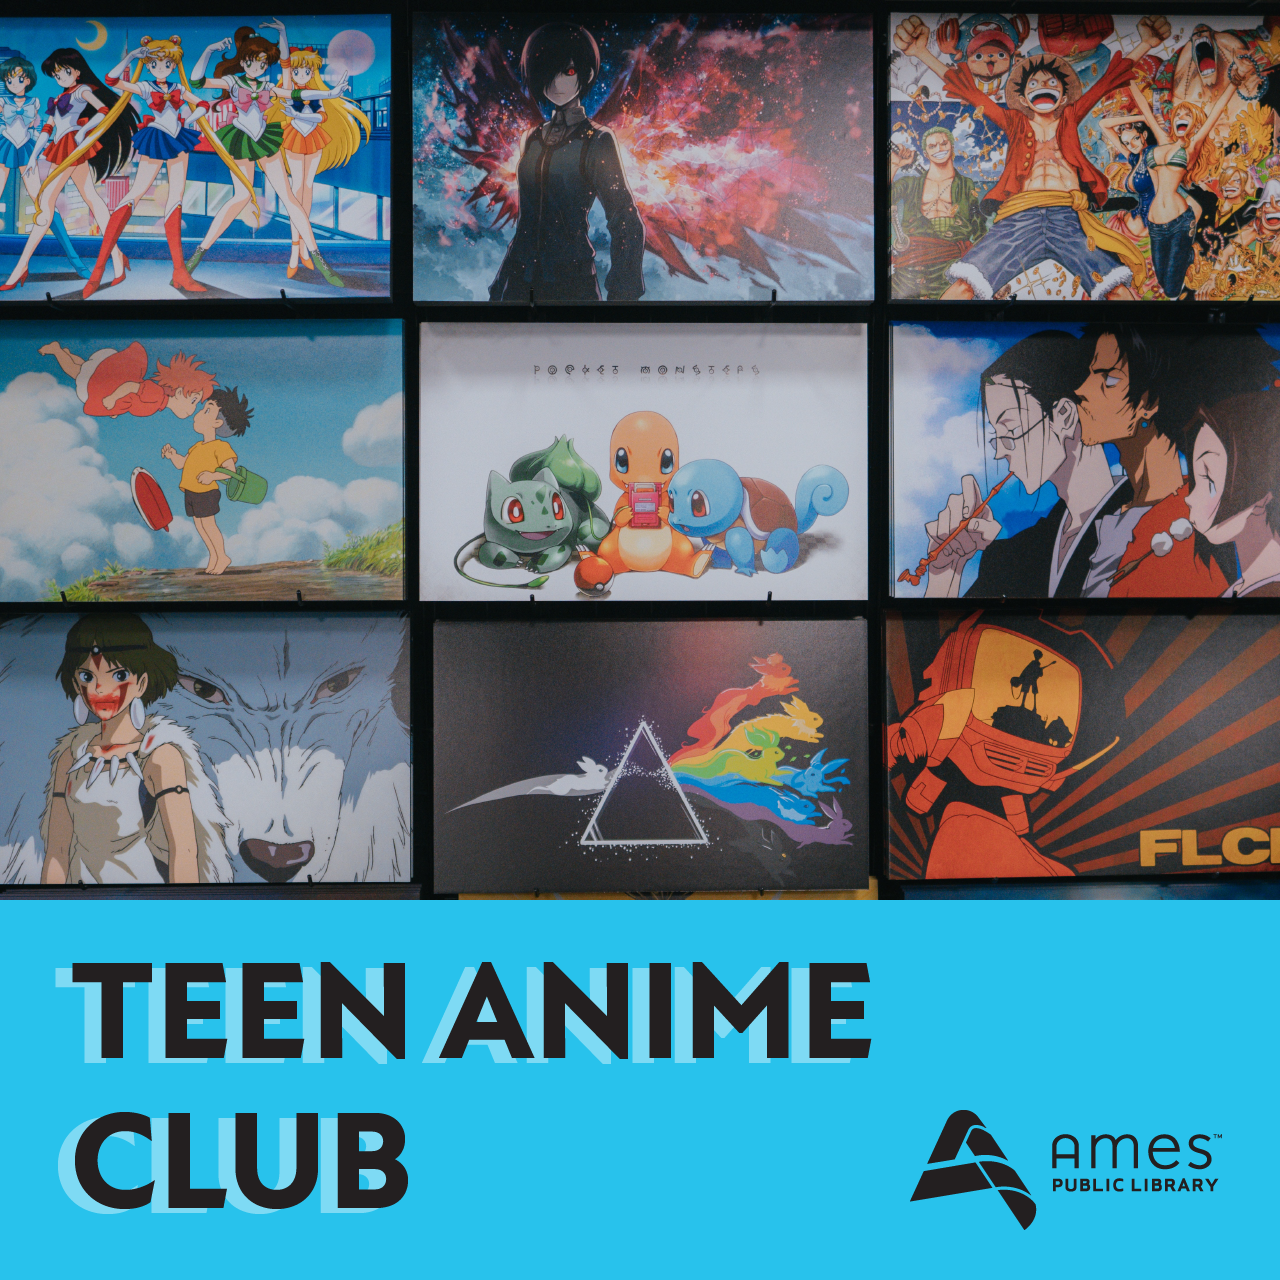 Teen Anime Club. Image features TV screens displaying various anime scenes.